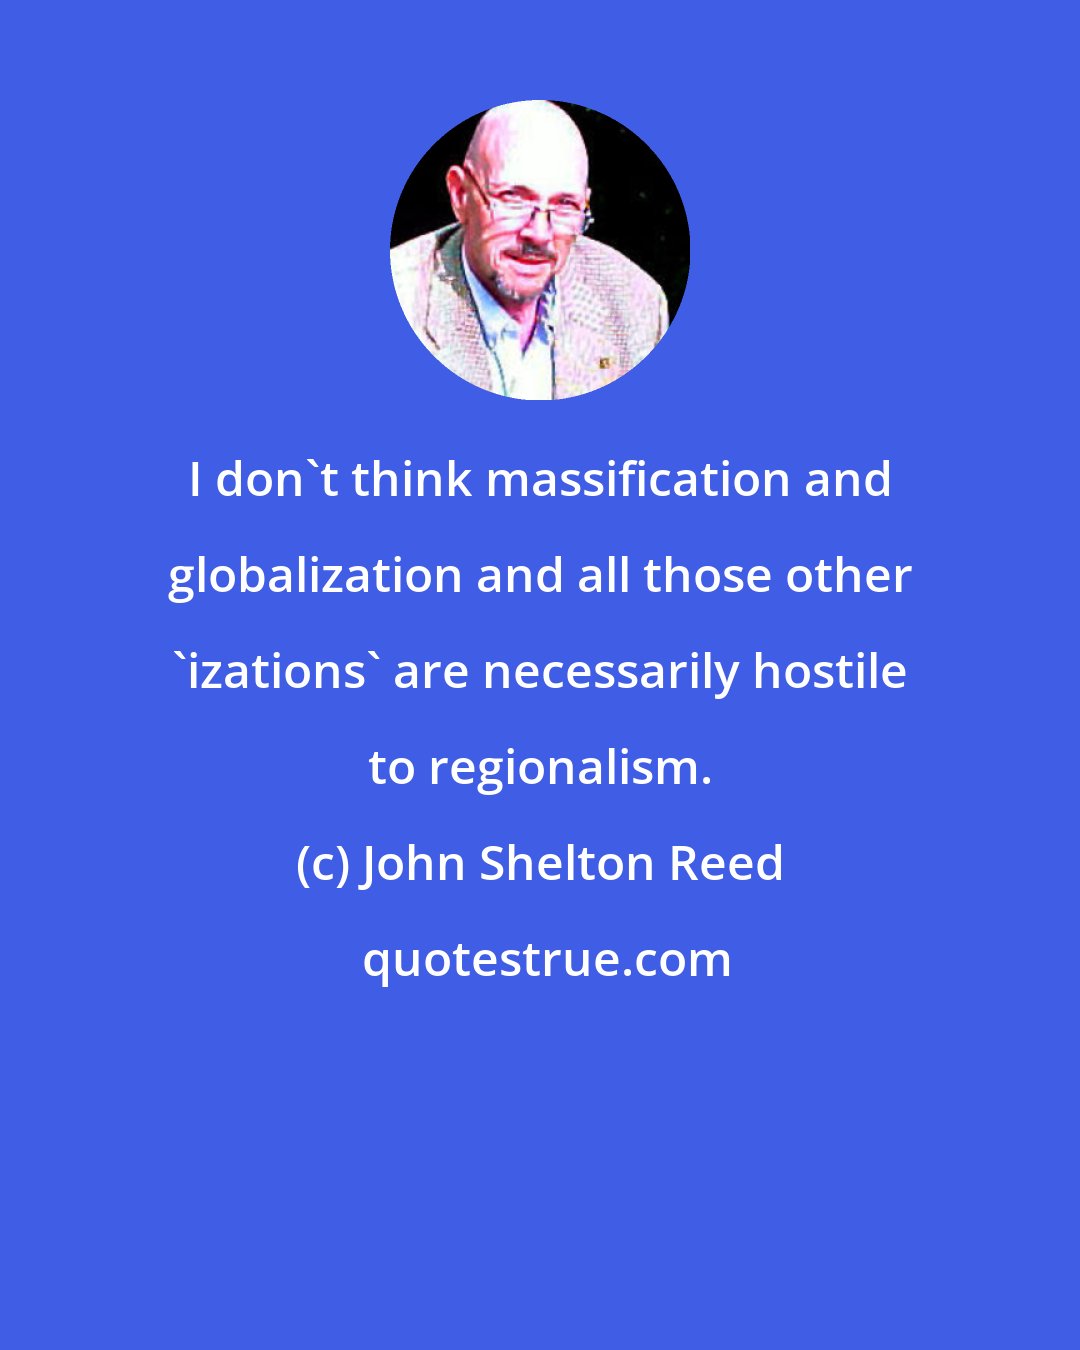 John Shelton Reed: I don't think massification and globalization and all those other 'izations' are necessarily hostile to regionalism.